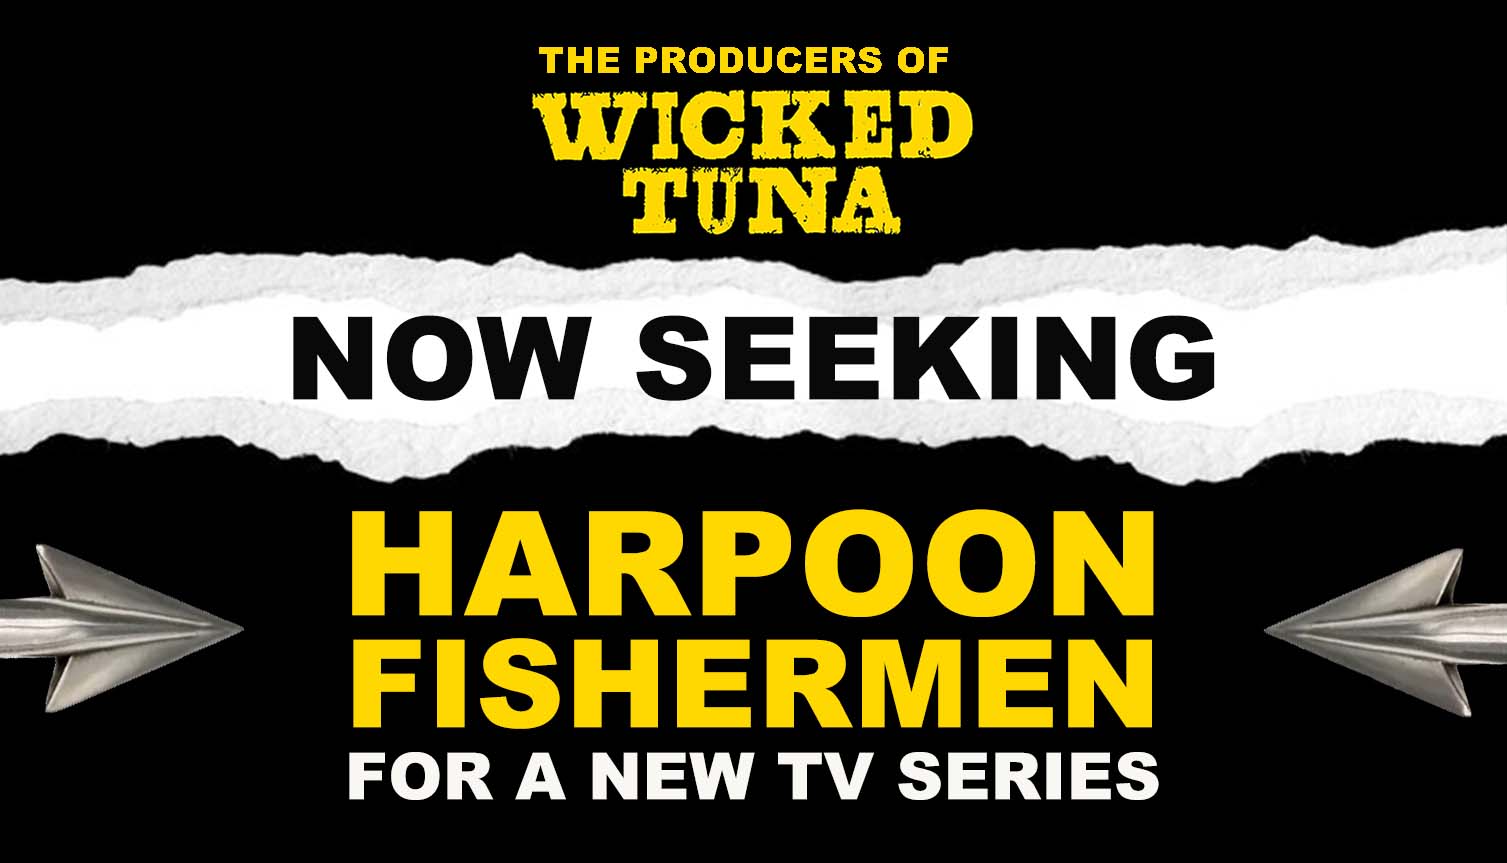 Now Seeking Harpoon Fishermen in New England for a Brand-New TV Series from the  Producers of Wicked Tuna!